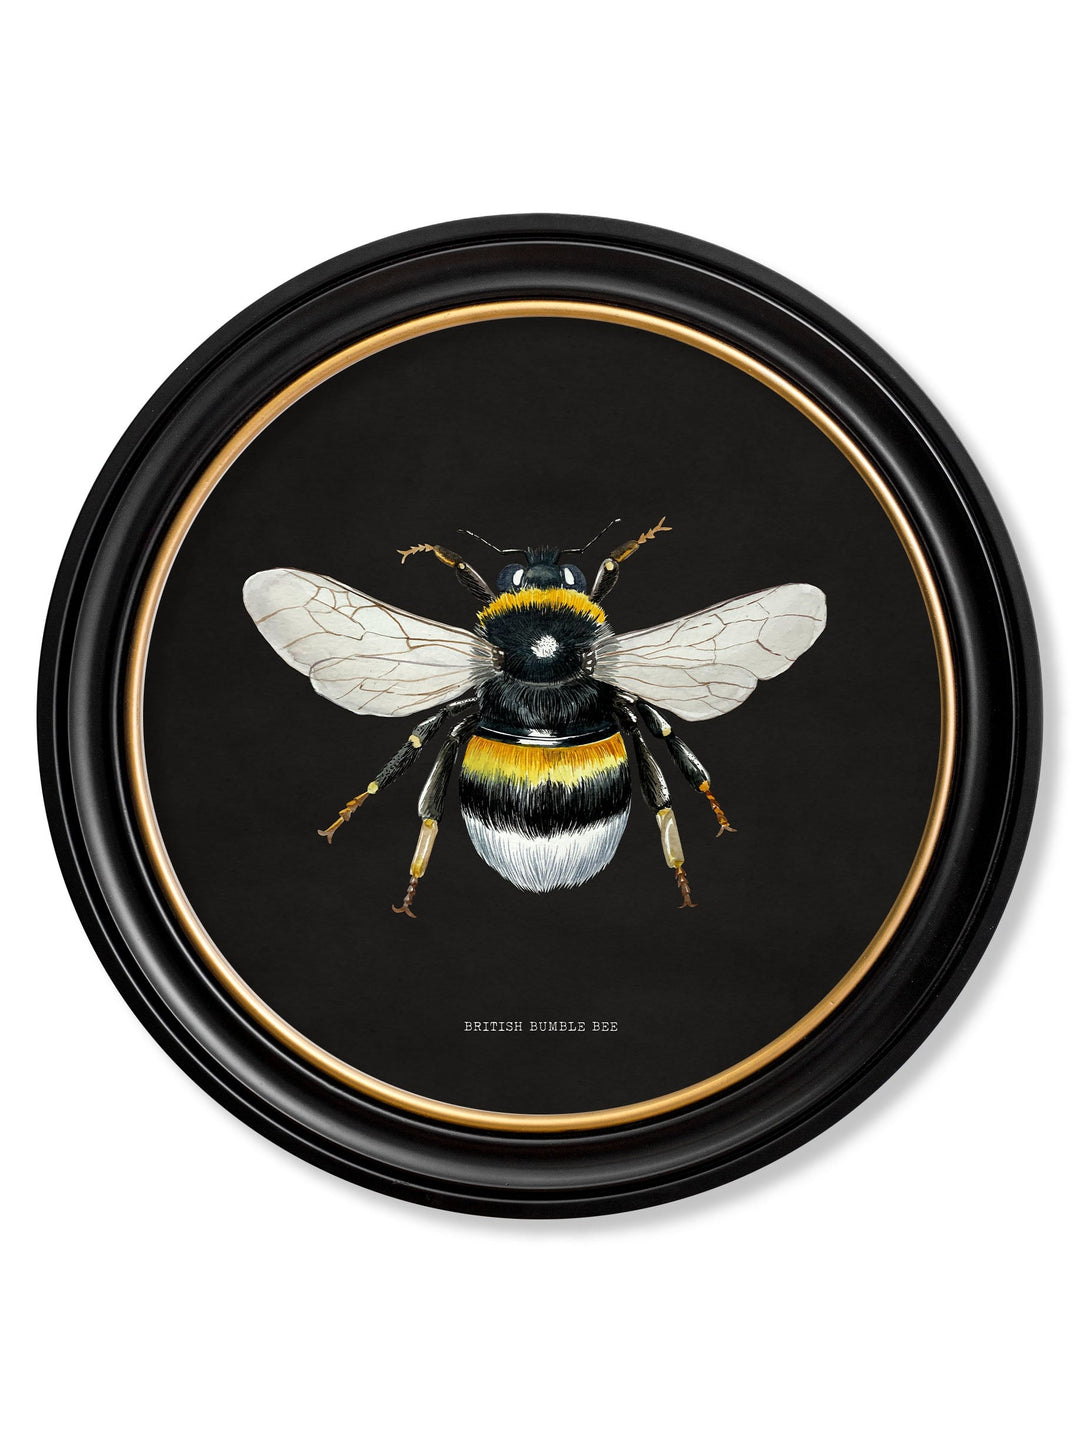 British Bees with Black Background – Oxford Round Framed Print